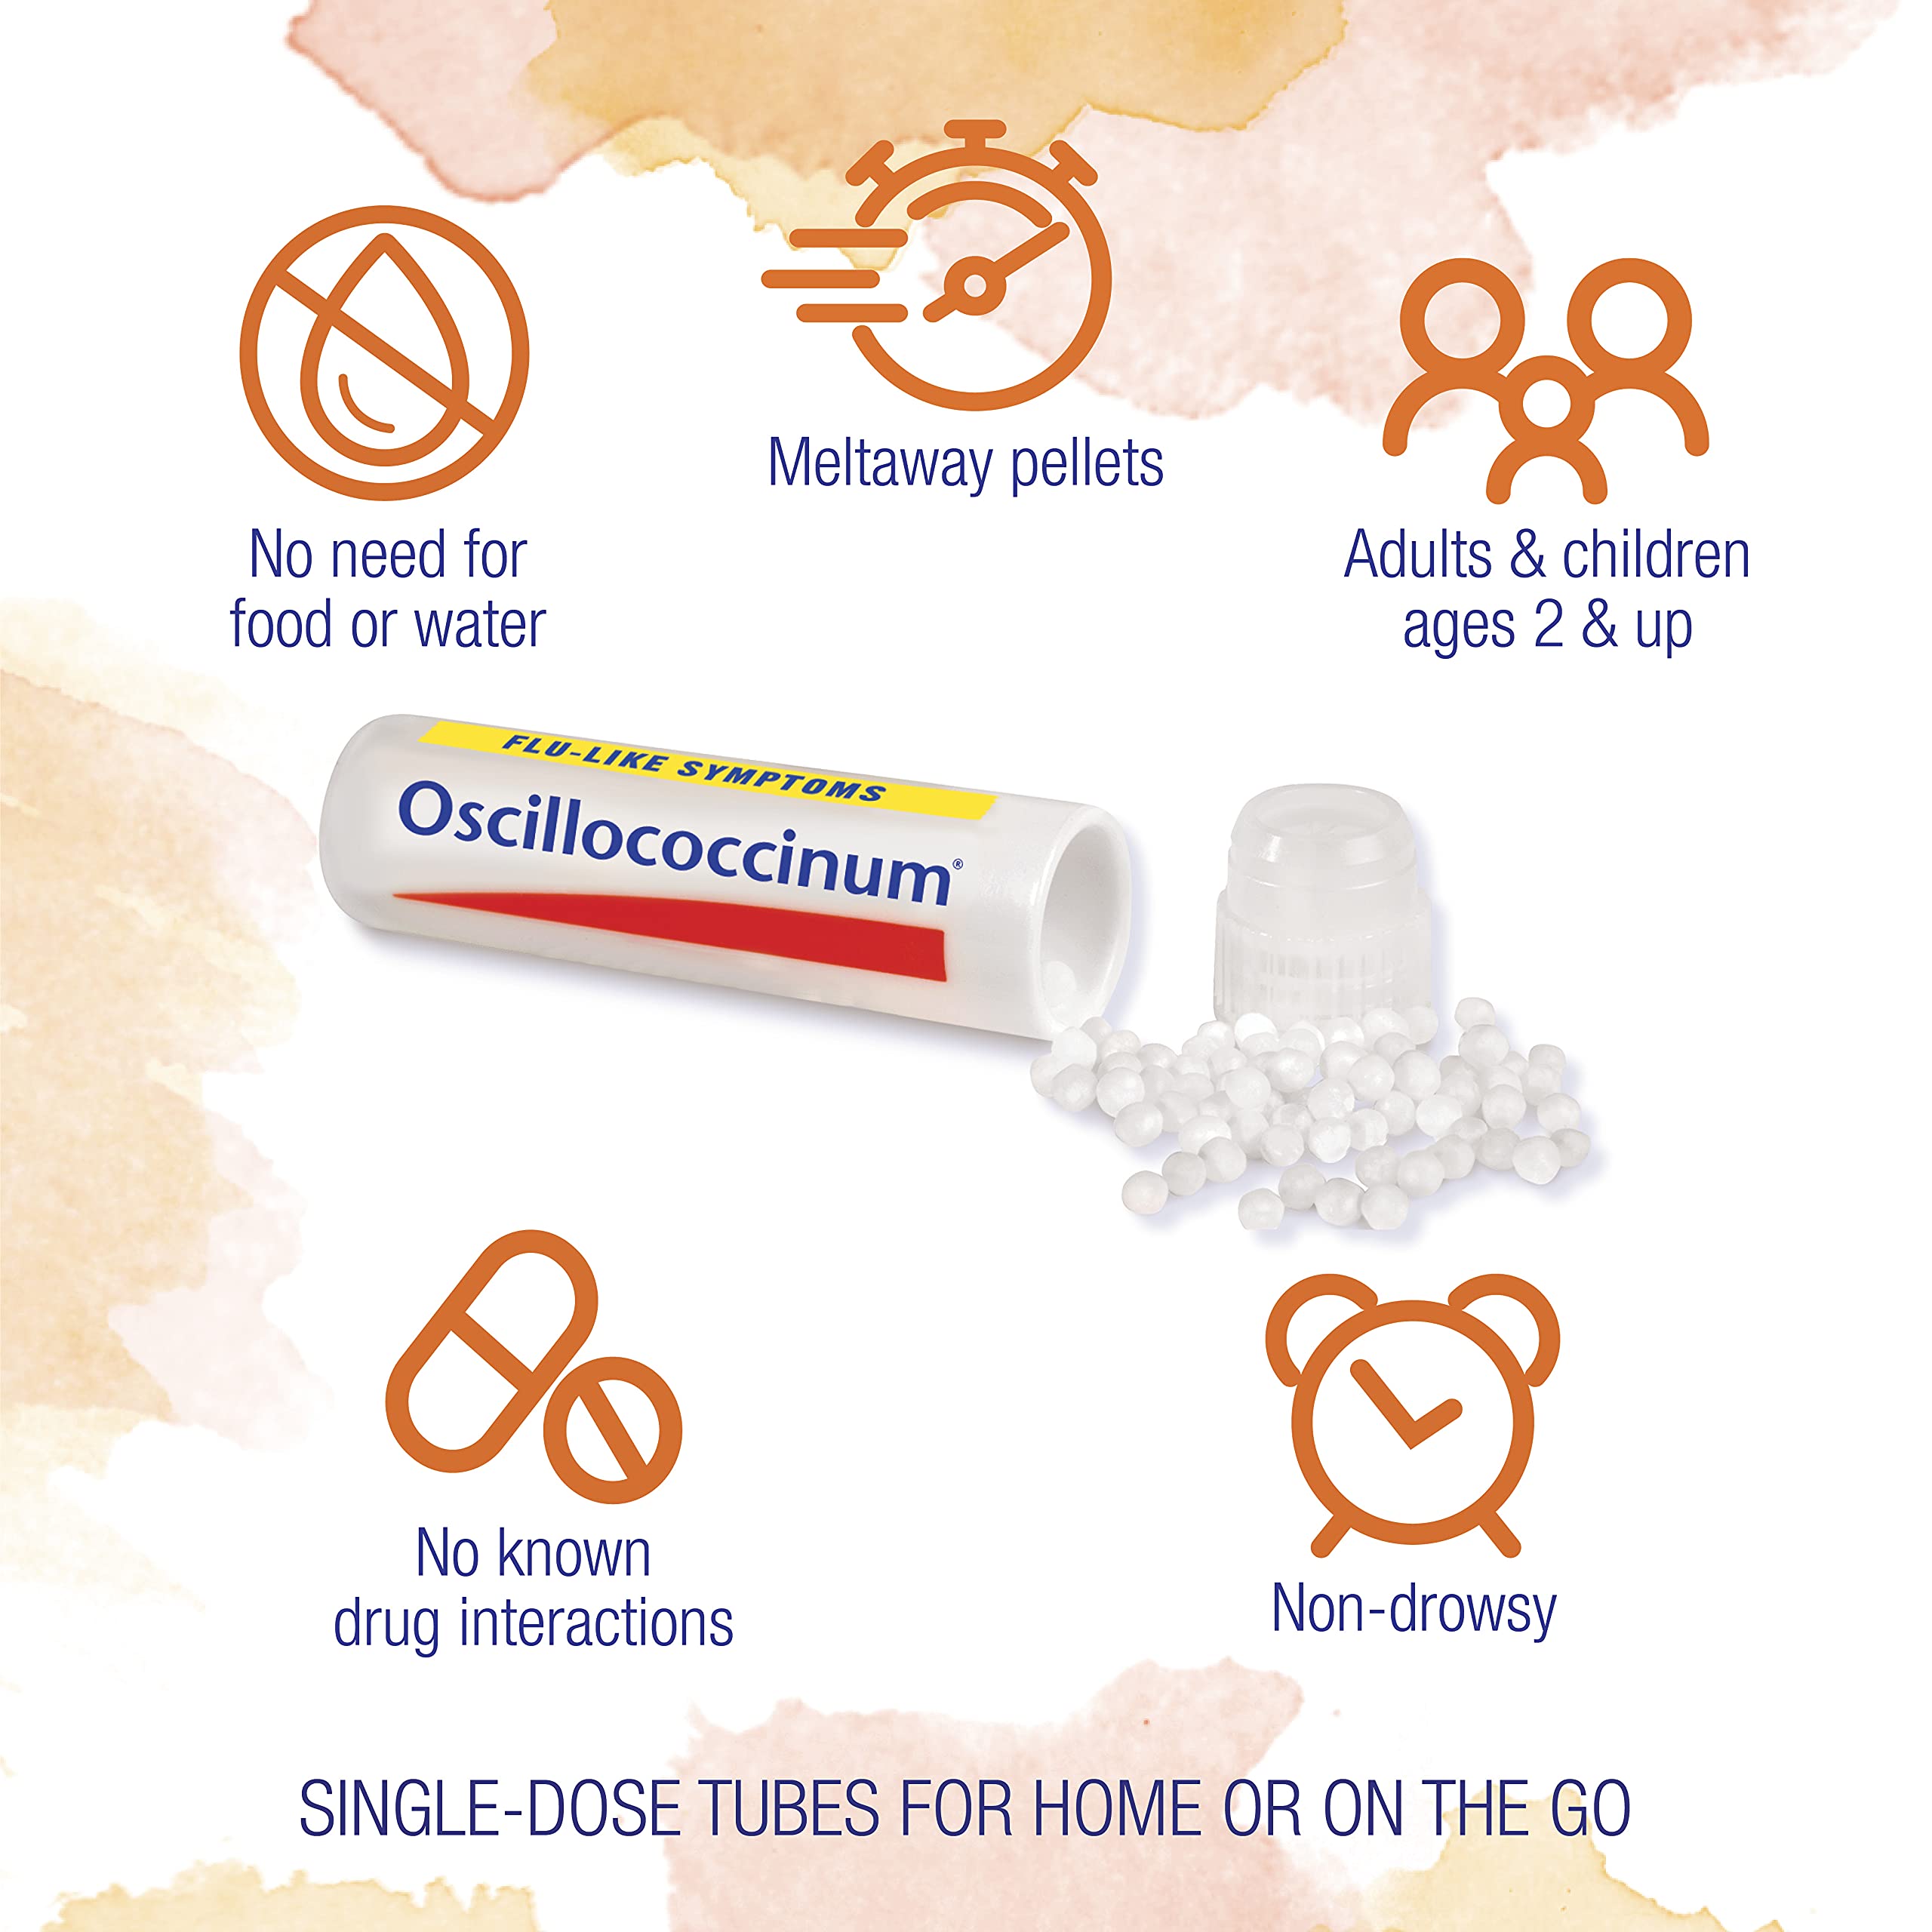 Boiron Oscillococcinum for Relief from Flu-Like Symptoms of Body Aches, Headache, Fever, Chills, and Fatigue - 6 Count (Pack of 2)